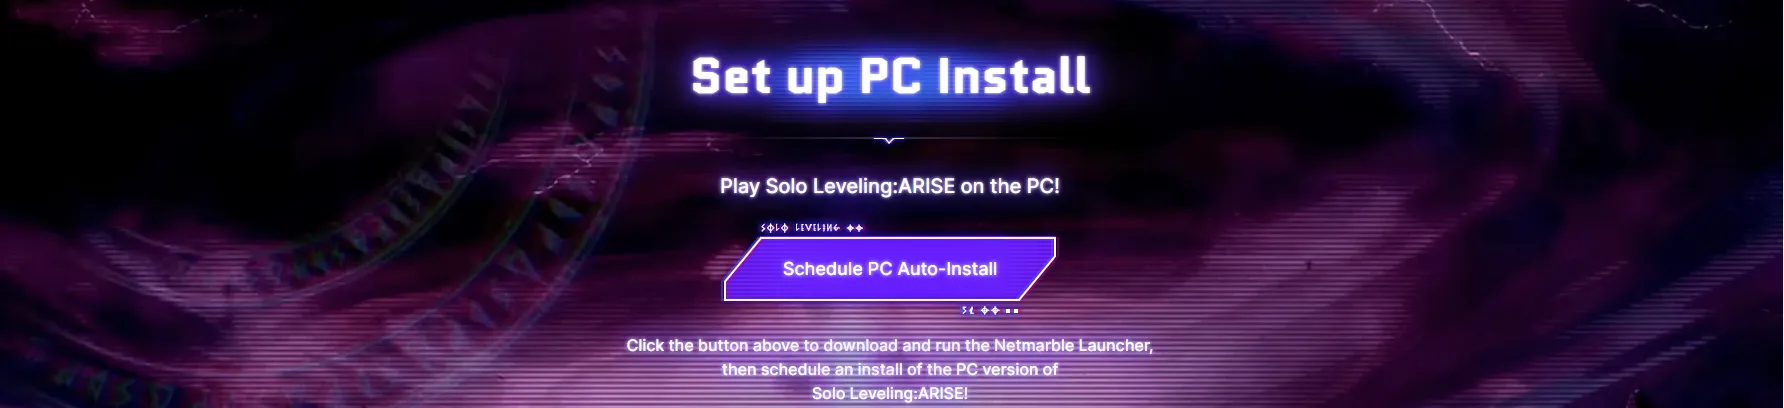 Solo Leveling Arise Pre-Download and Release Date